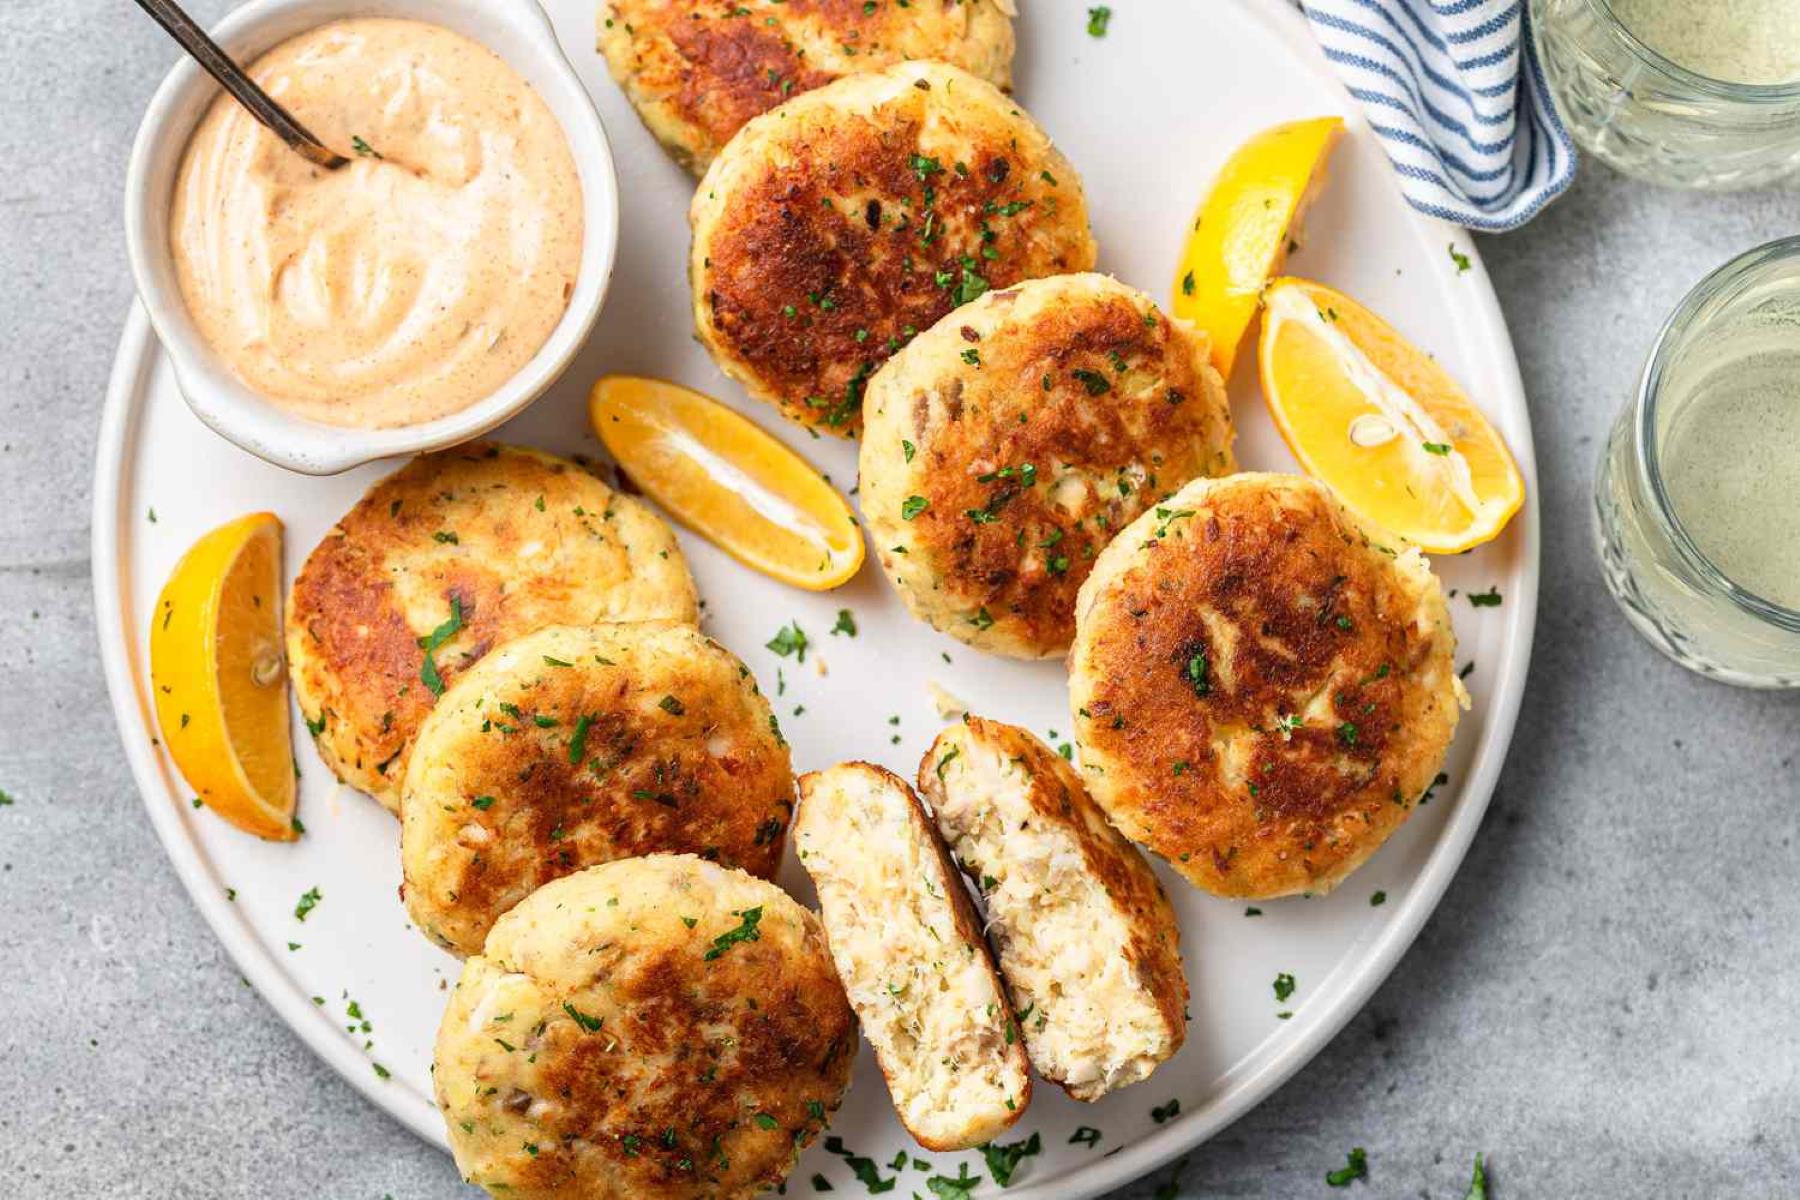 Norwegian Fish Cakes: A Must-Have Dish For Your International Food Party